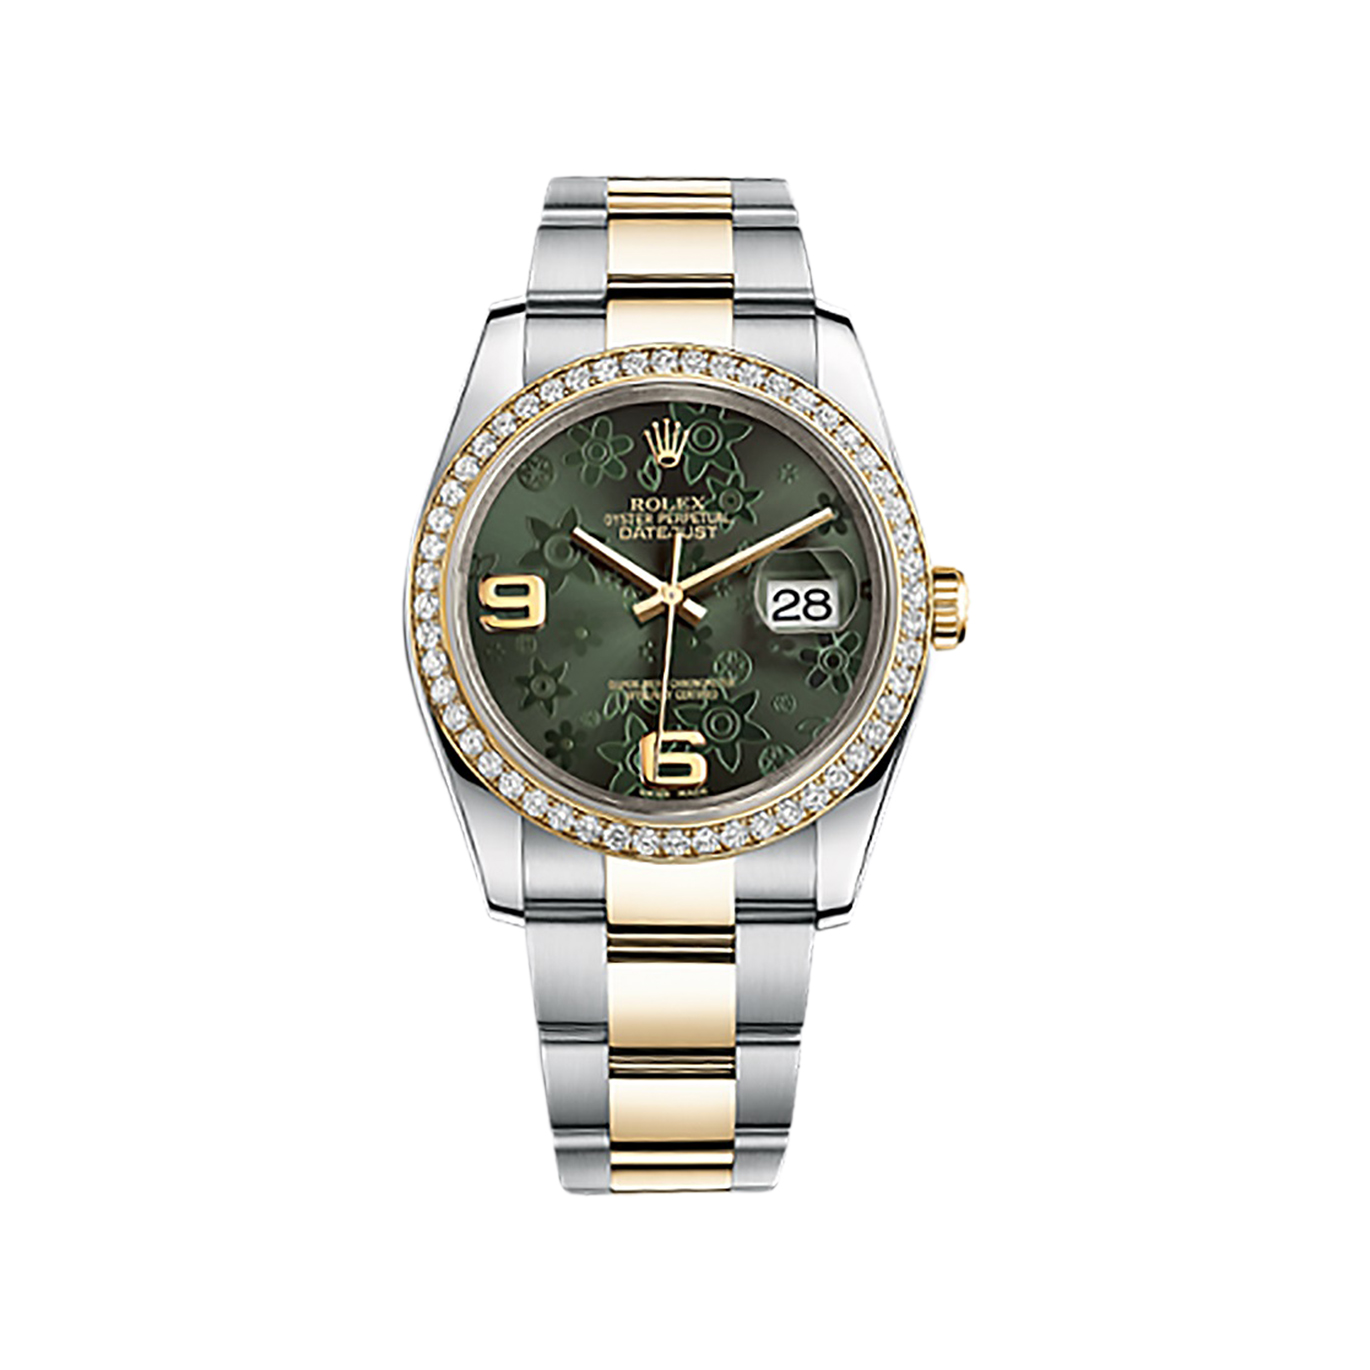 Datejust 36 116243 Gold & Stainless Steel Watch (Green Floral Motif)